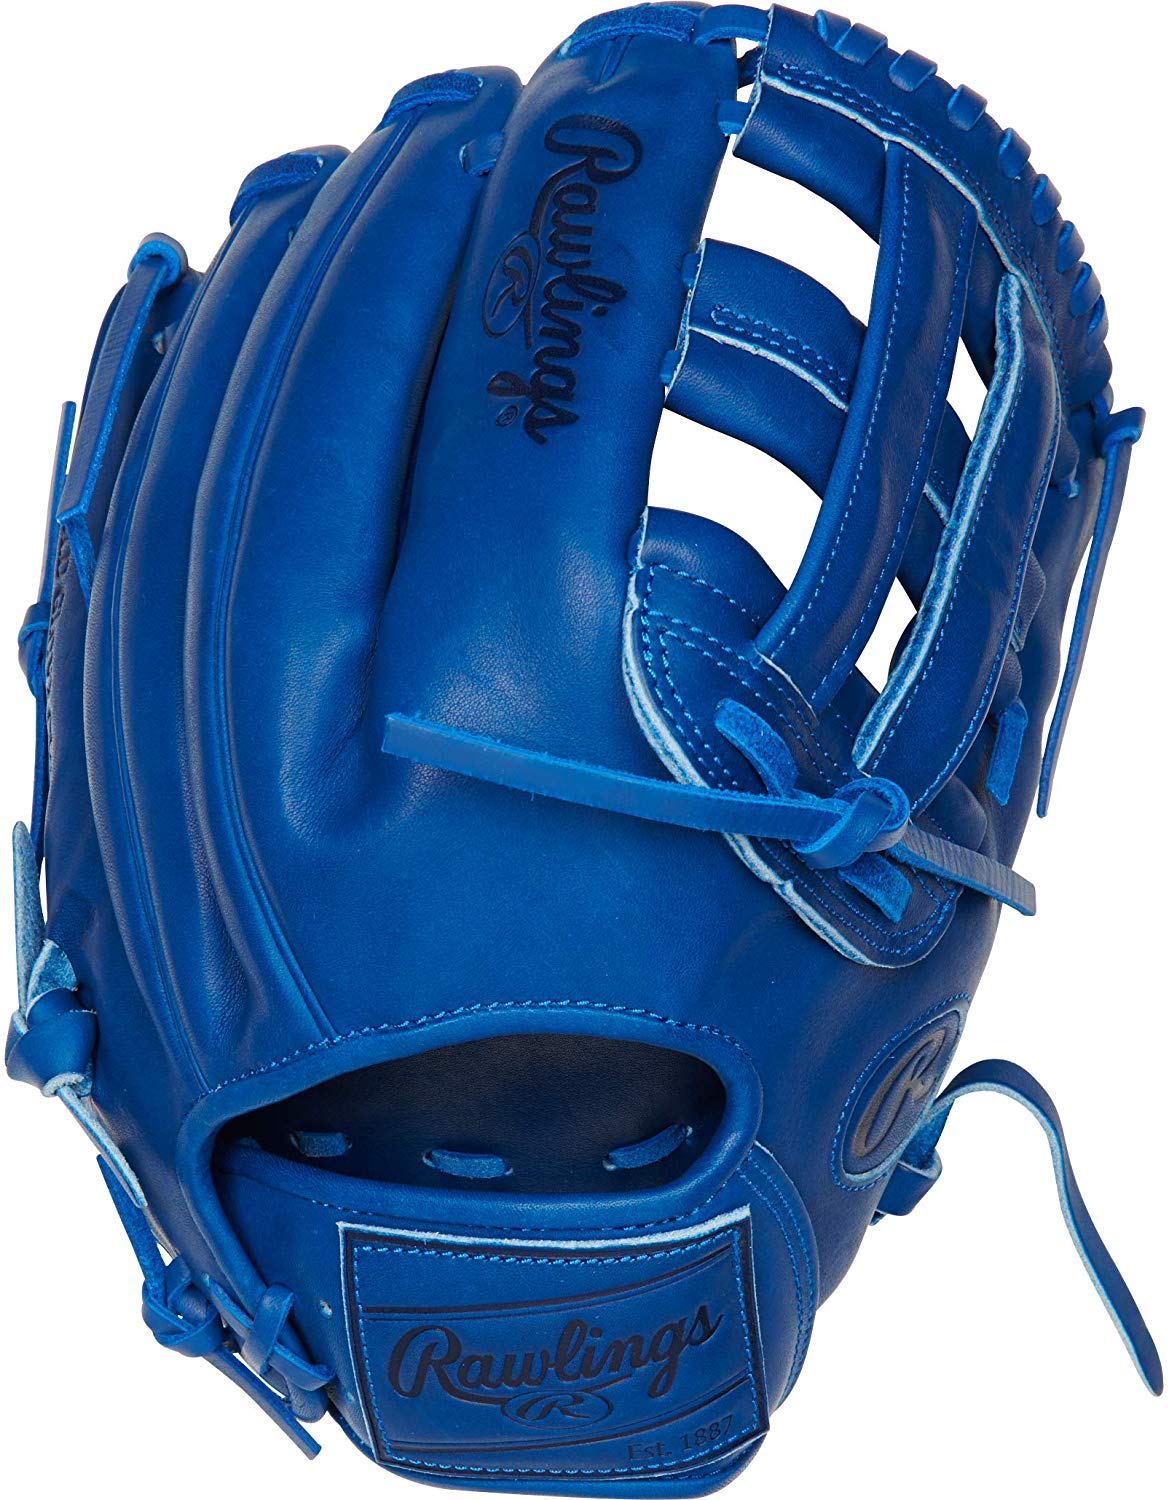 The Rawlings limited edition Heart of the Hide Pro Label 5 Storm glove features ultra-premium steer-hide leather for unmatched quality and performance. Its KB17 pattern is the same pattern worn by one of the game's best, Kris Bryant, to hold down the hot corner. In addition, its one-tone royal blue design adds a unique style as part of the limited edition Pro Label 5 Elements series. The royal leather patch adds the perfect touch to the one-tone Royal design, to give you added flair every time you step on the field. Don't miss out on this glove. Make the Pro Label 5 Storm your next gamer. Get yours now, before they're gone!  Color:   Royal  Throwing Hand:   Right  Sport:   Baseball  Back:   Conventional  Player Break-In:   60  Fit:   Standard  Level:   Adult  Lining:   Deer-Tanned Cowhide  Padding:   Moldable  Series:   Heart of the Hide Pro Label  Shell:   Steer Hide Leather  Web:   Pro H  Used By:   Kris Bryant  Size:   12.25 in  Collection:   Pro Label  Pattern:   KB17  Age Group:   Pro/College, High School, 14U, 12U  